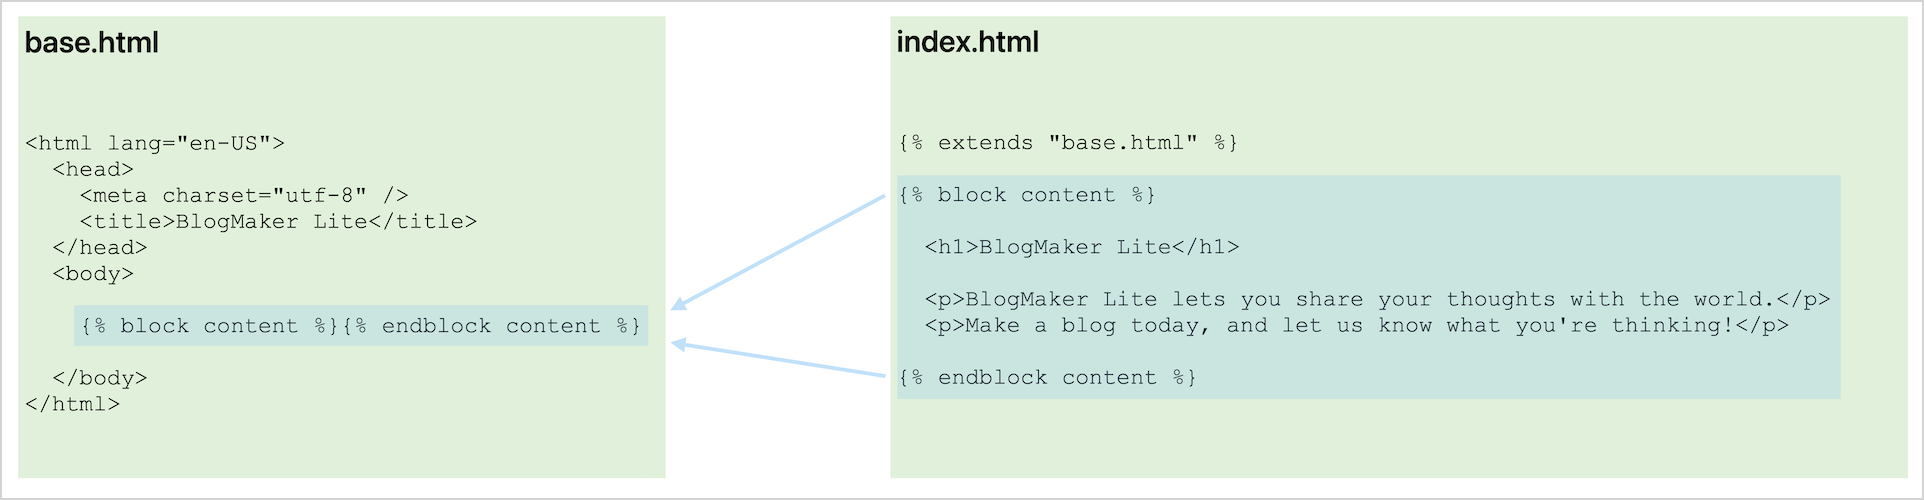 block named content from index.html being fed into block named content in base.html